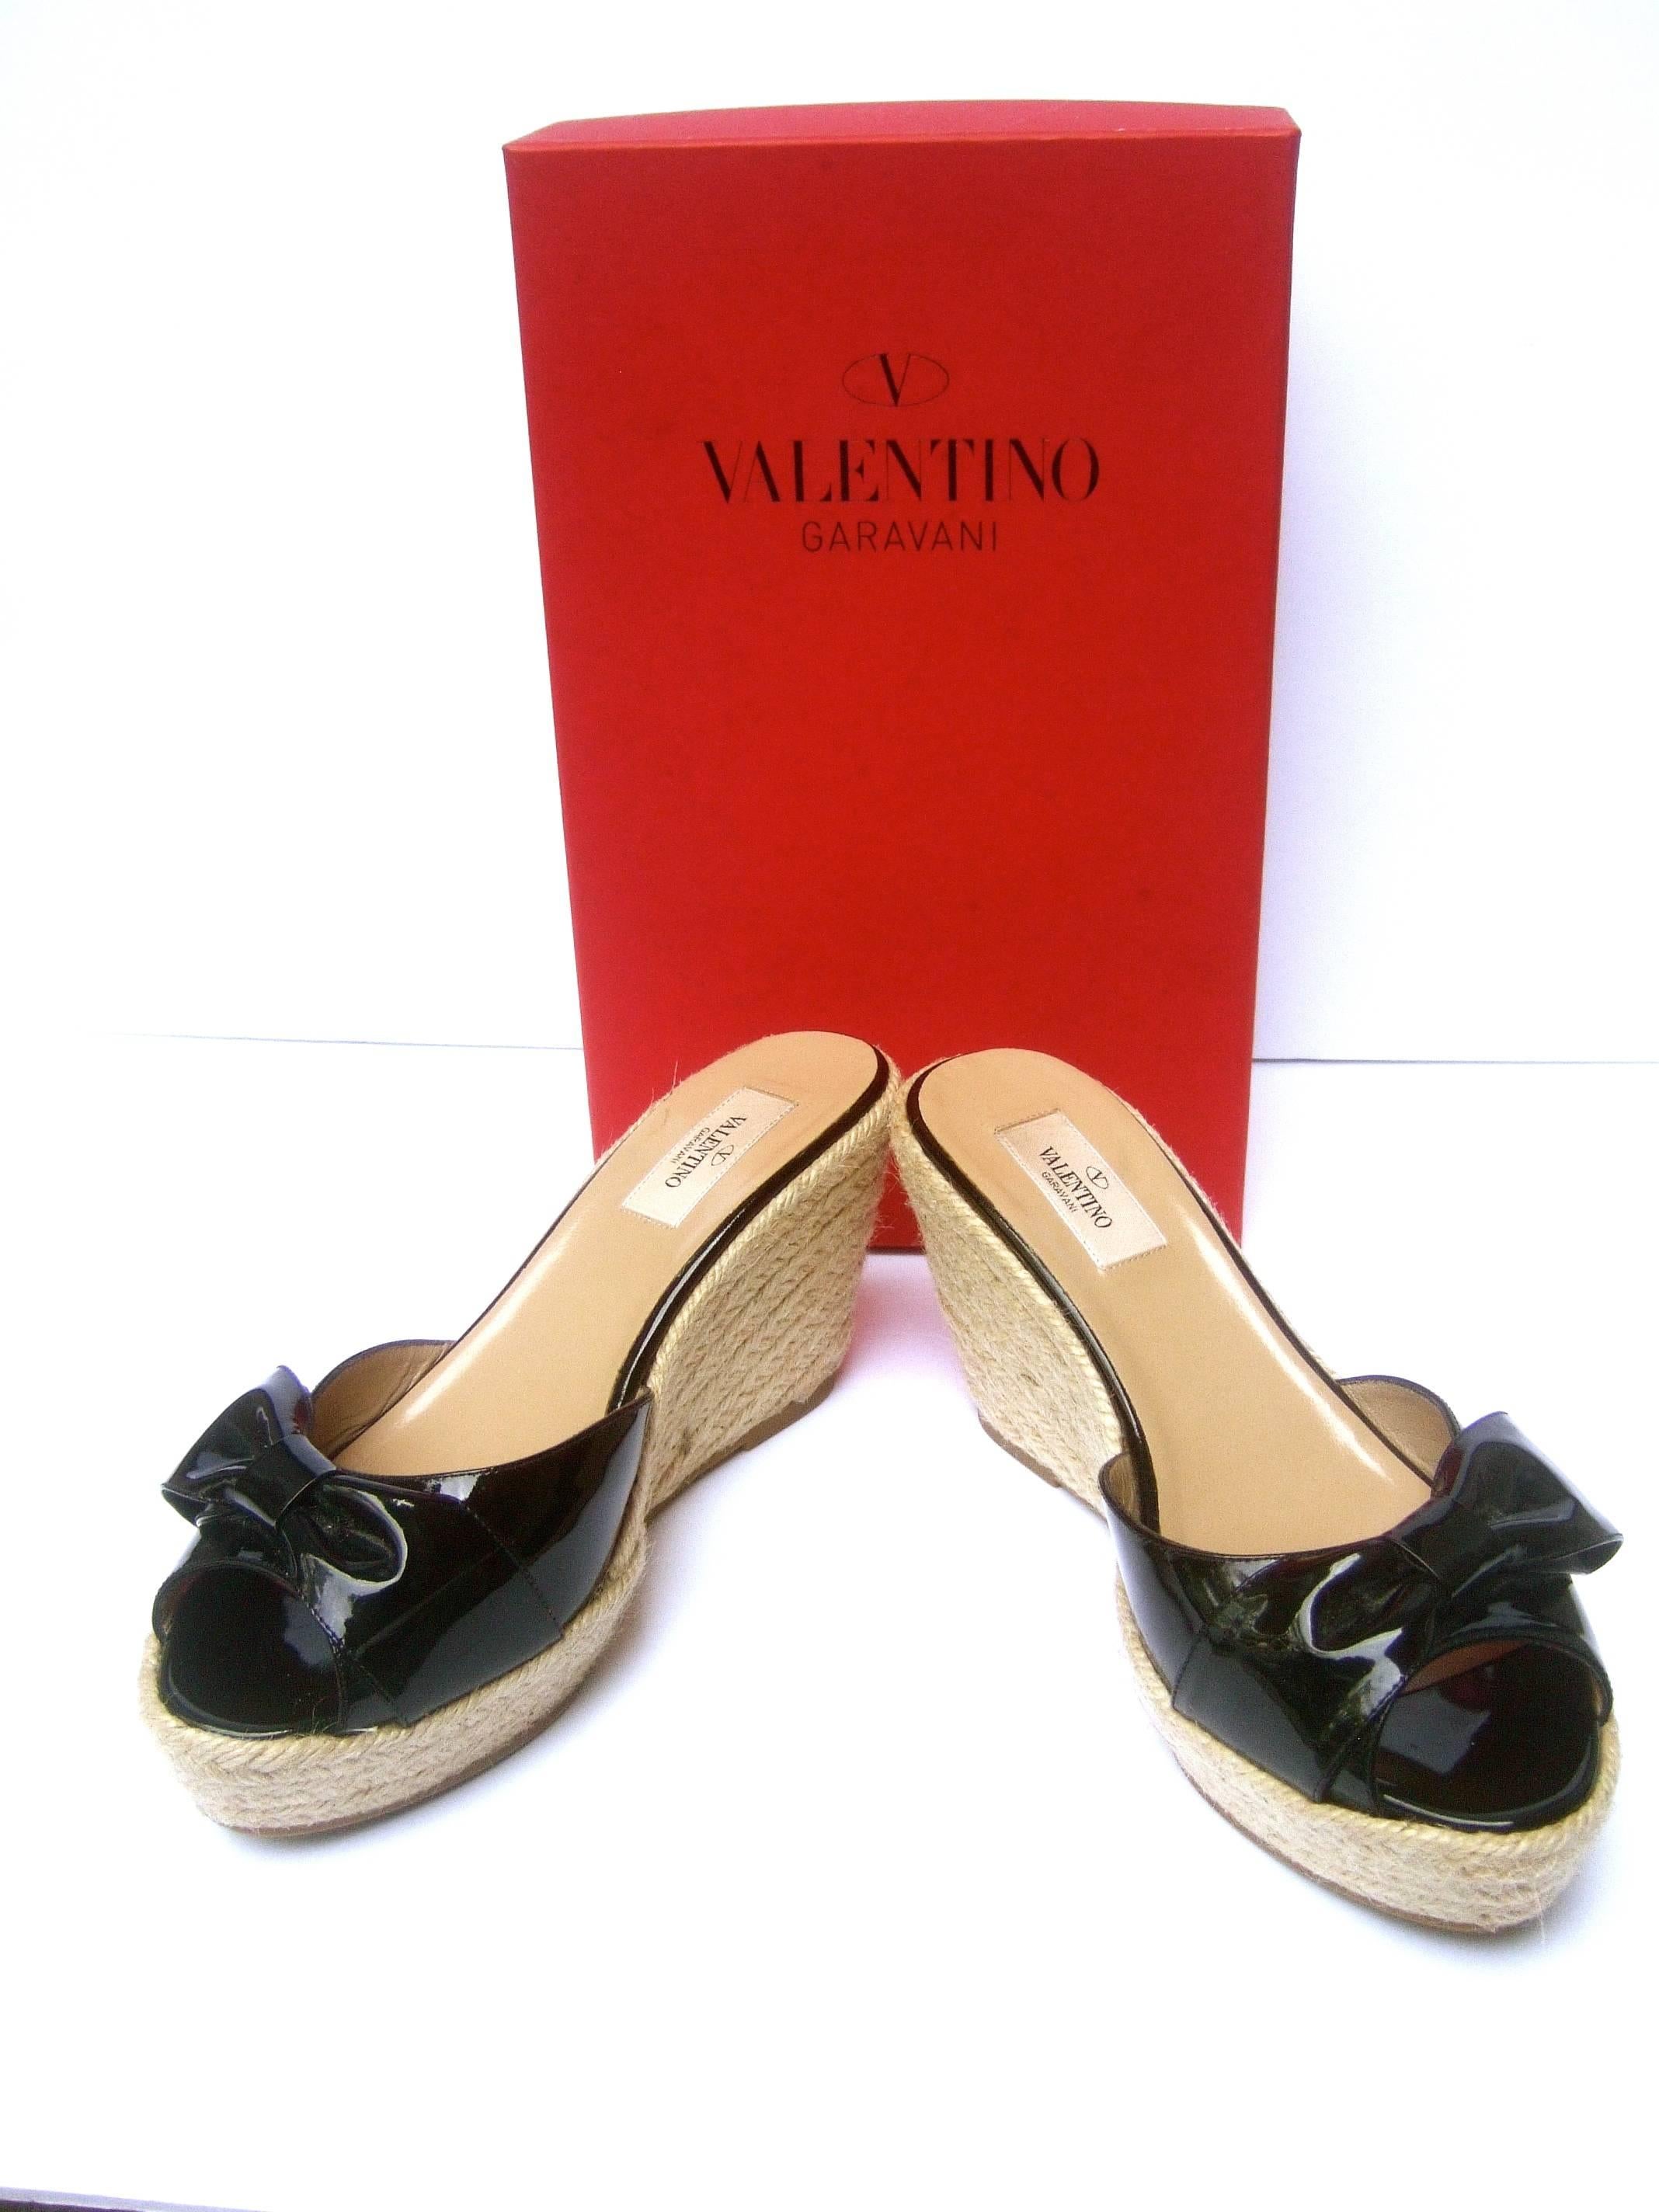 Valentino Italy black patent leather wedge rope sandals Size 40 
The stylish open toe sandals are designed with glossy black
patent leather with a large matching bow on each shoe 

The platform wedge heels have a braided rope covering
Makes for a